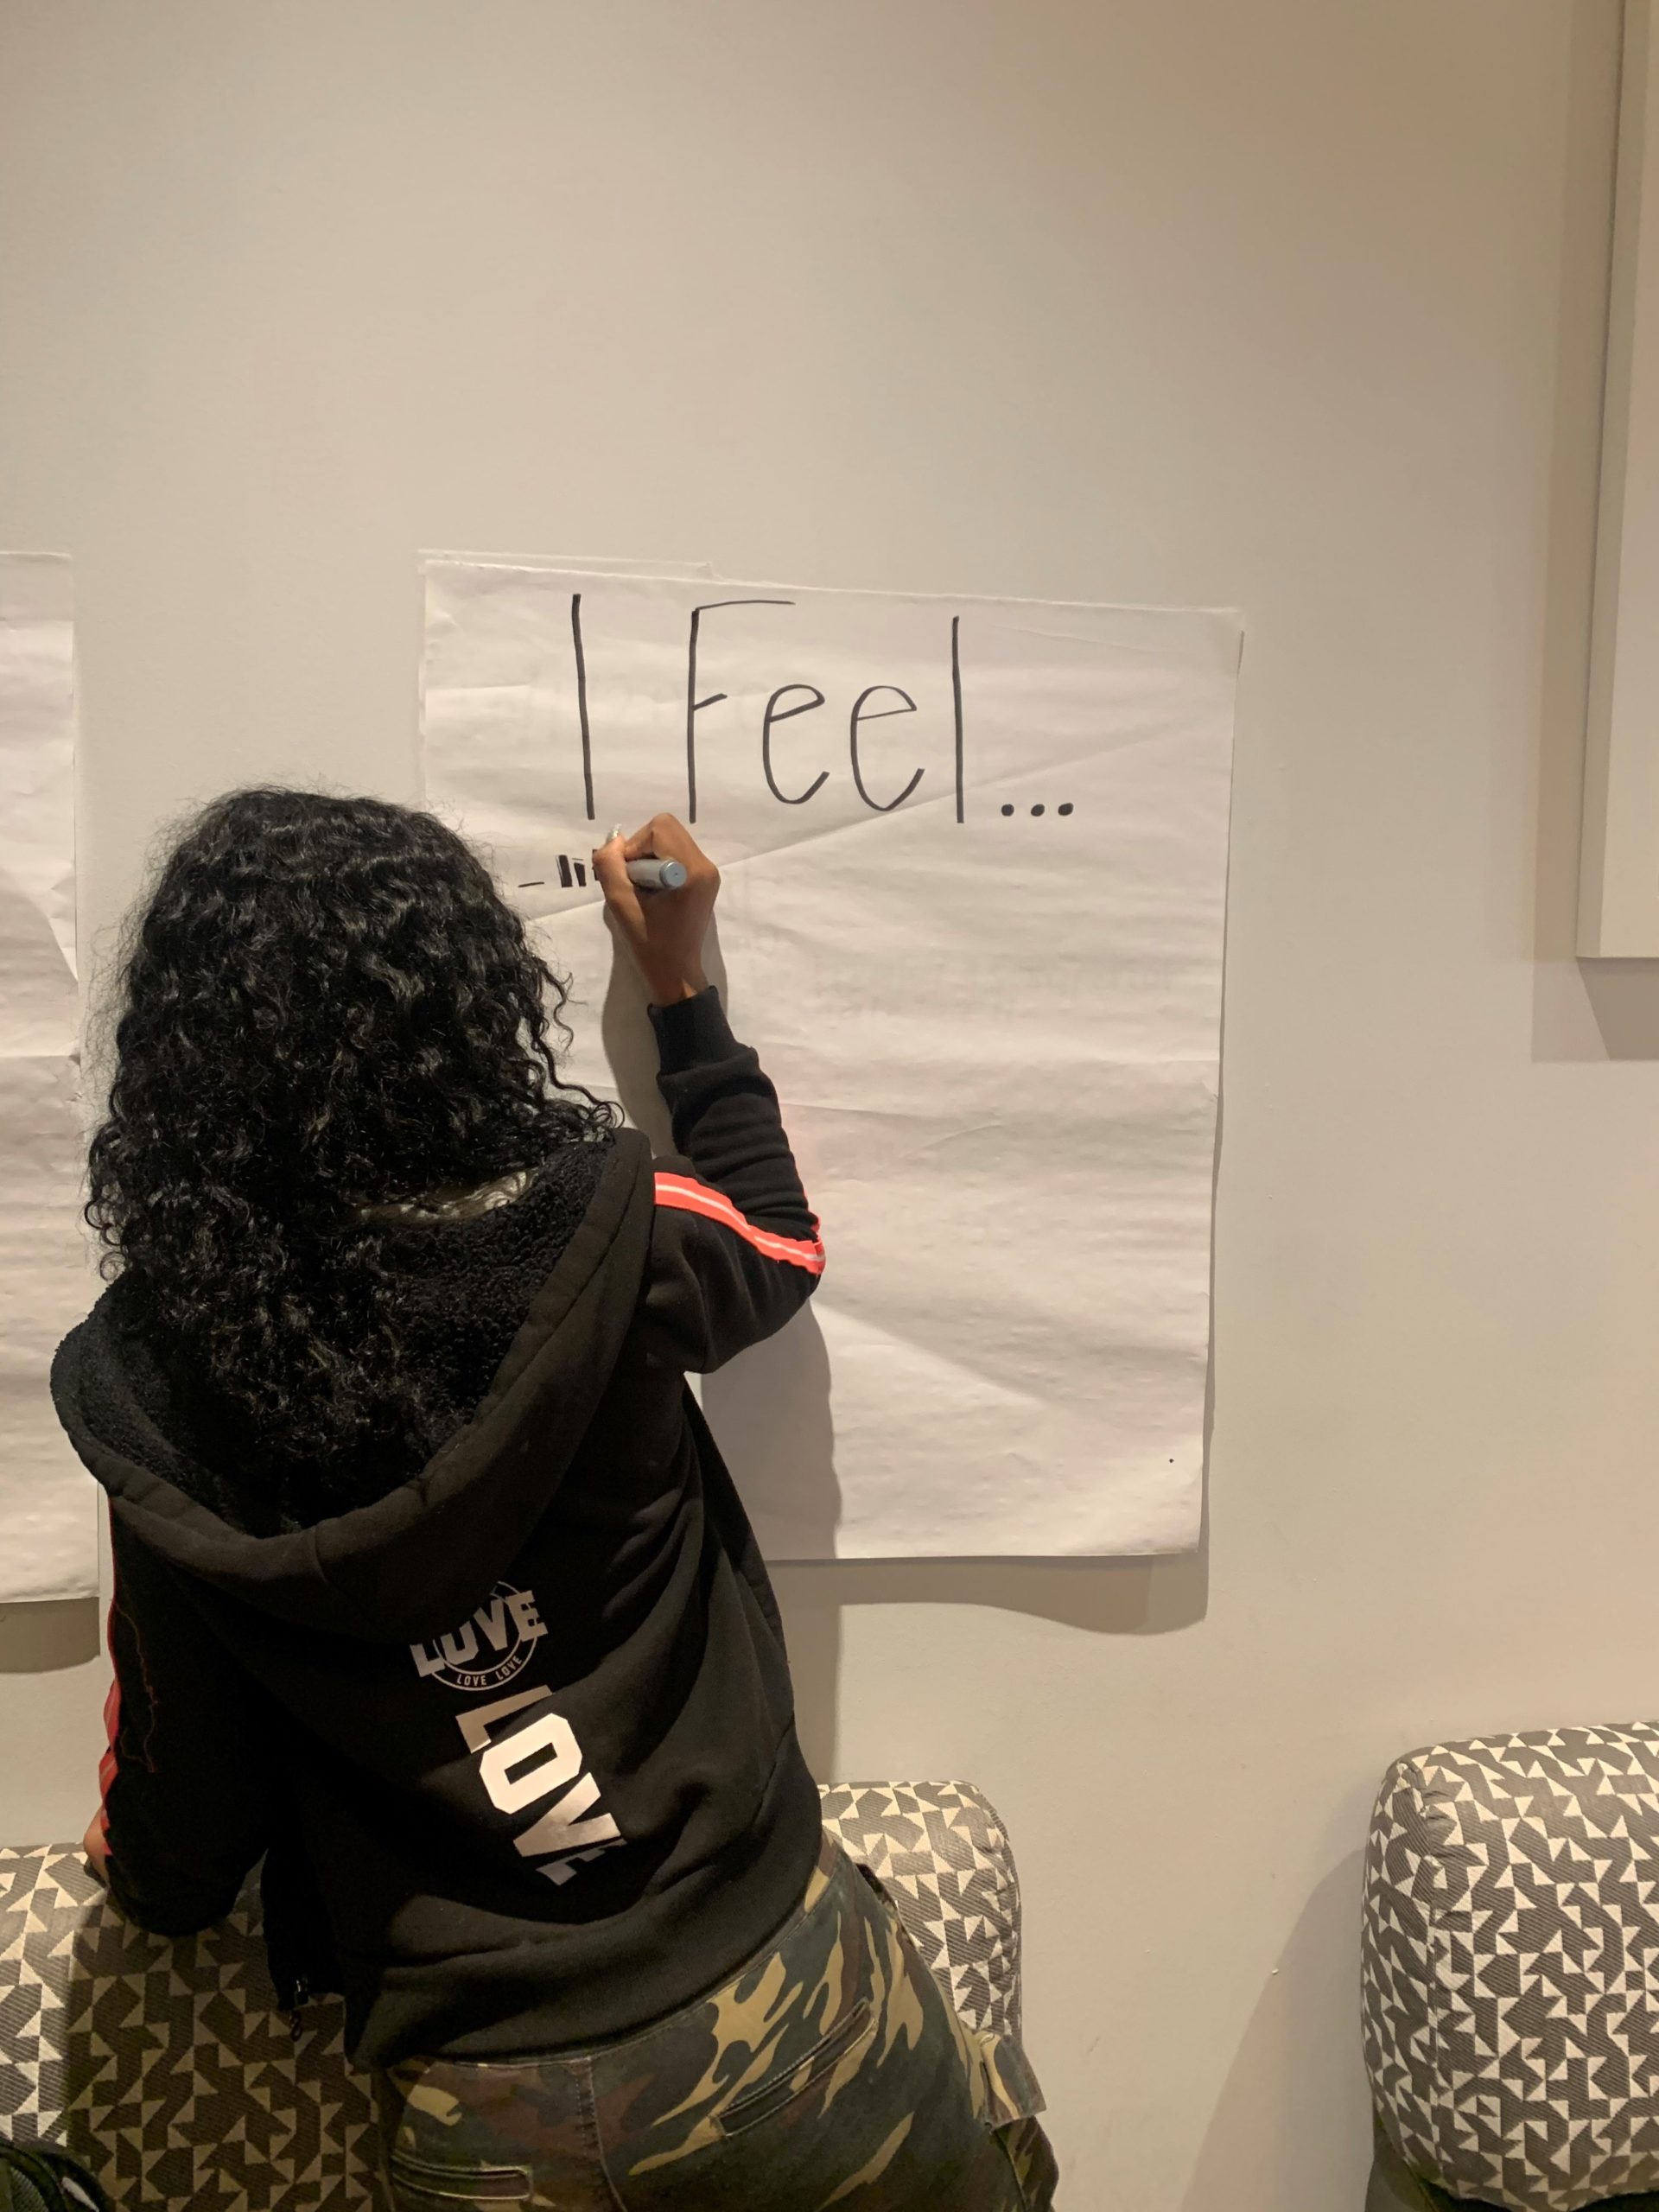 A person writes "I Feel" on a large sheet of paper on the wall